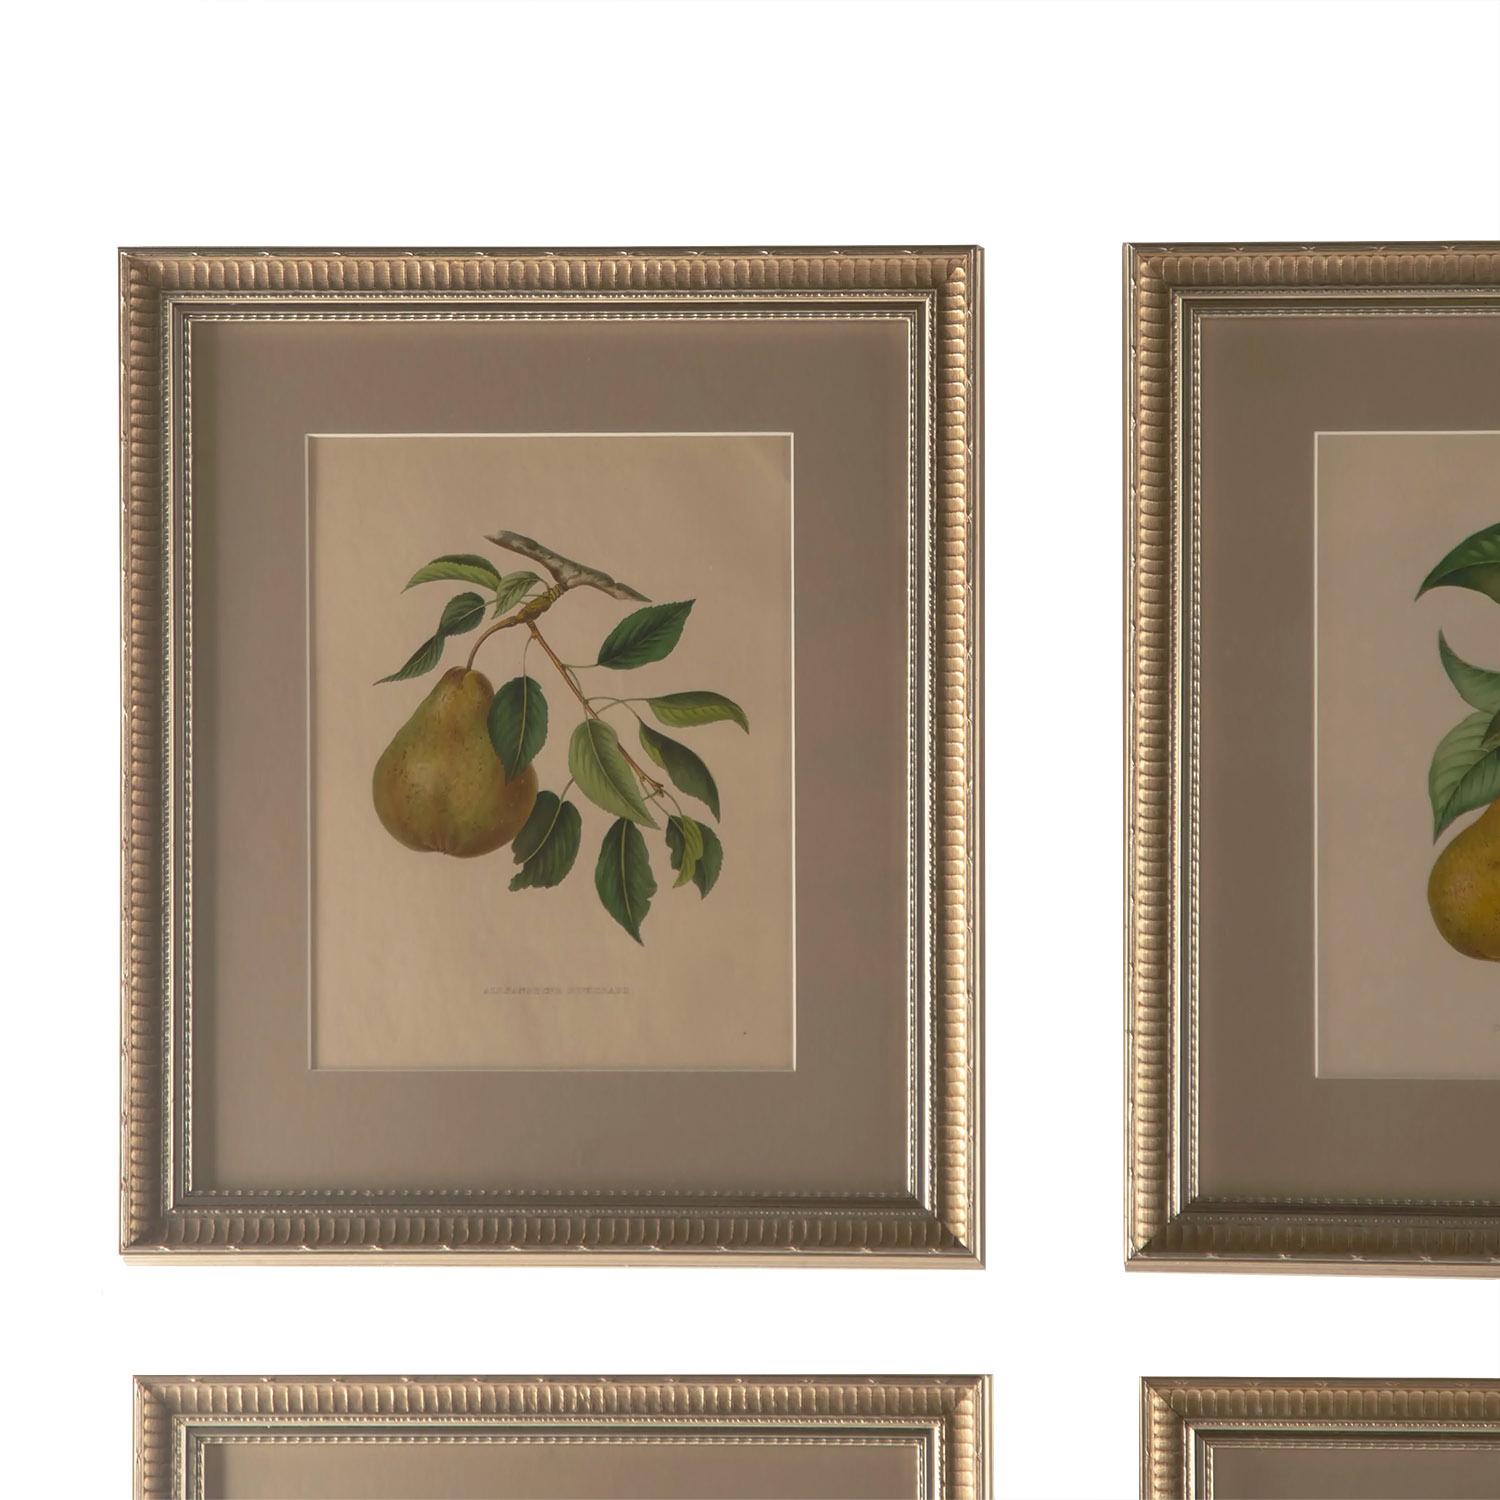 A set of nine pears by Alexandre Bivort who was a Belgian nurseryman who published two works, Album de Pomologie (1847-1851) followed by Annales de Pomologie Belge et Etrangere (1853-1860).
They remain the Classic reference on Belgian fruit of the